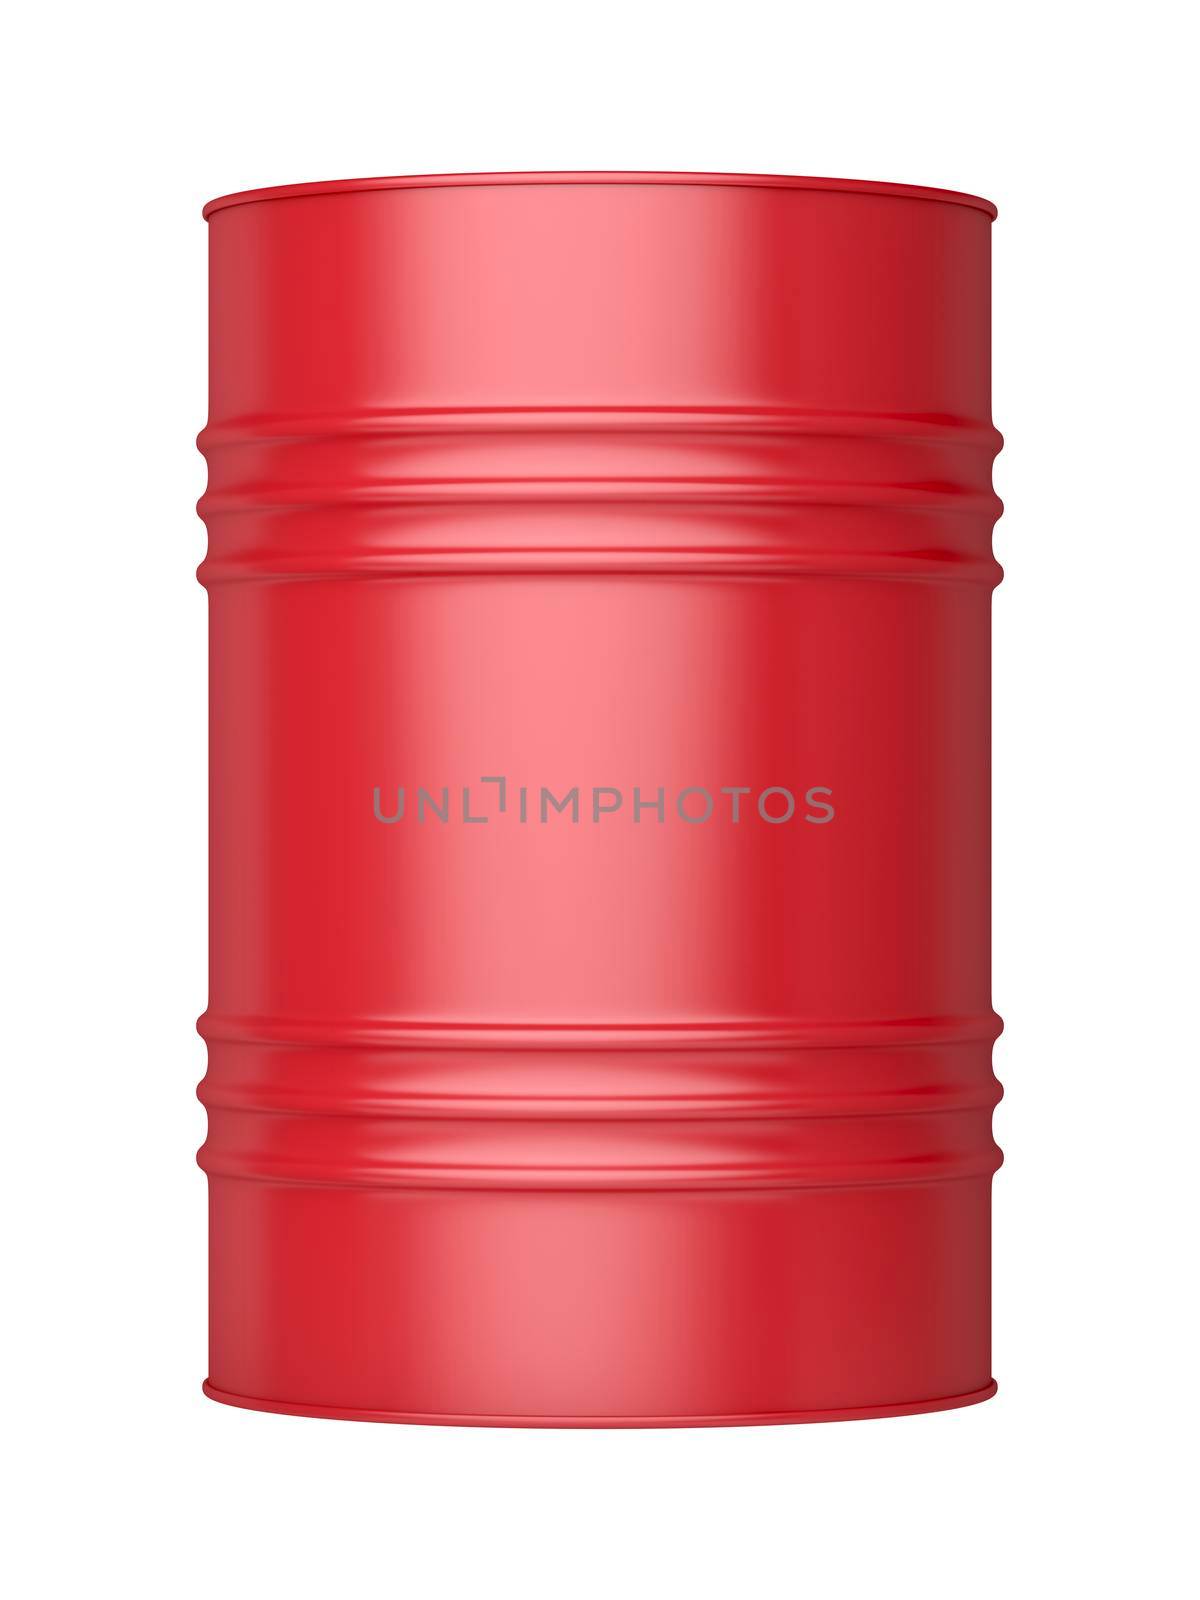 Red oil barrel by magraphics